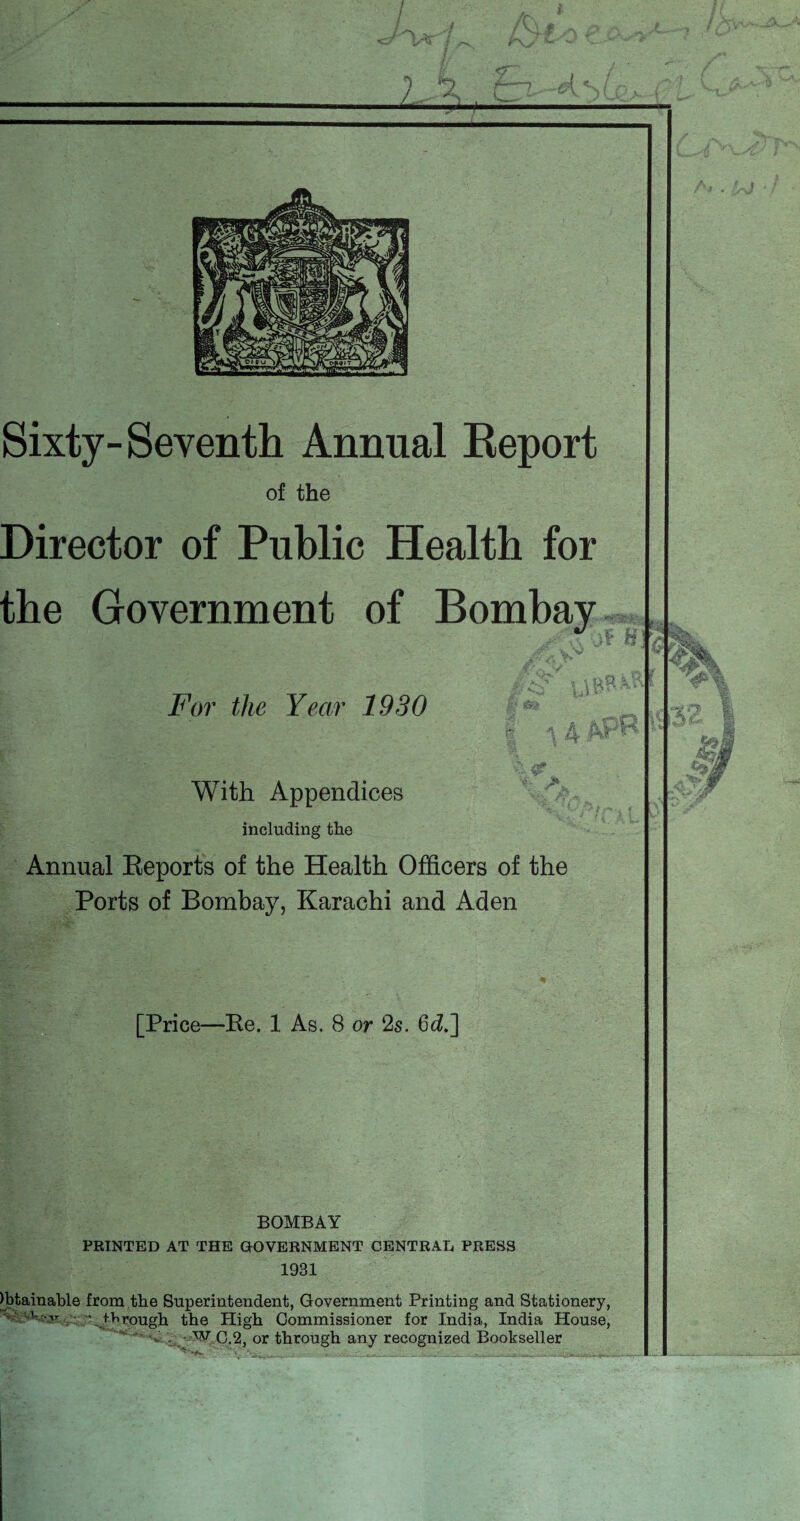 Sixty- Seventh Annual Report of the Director of Public Health for the Government of Bombay For the Year 1930 With Appendices including the Annual Reports of the Health Officers of the Ports of Bombay, Karachi and Aden [Price—Re. 1 As. 8 or 2s. 6d.] BOMBAY PRINTED AT THE GOVERNMENT CENTRAL PRESS 1931 Obtainable from the Superintendent, Government Printing and Stationery, v-''v''r \ through the High Commissioner for India, India House, - - Vtf C.2, or through any recognized Bookseller